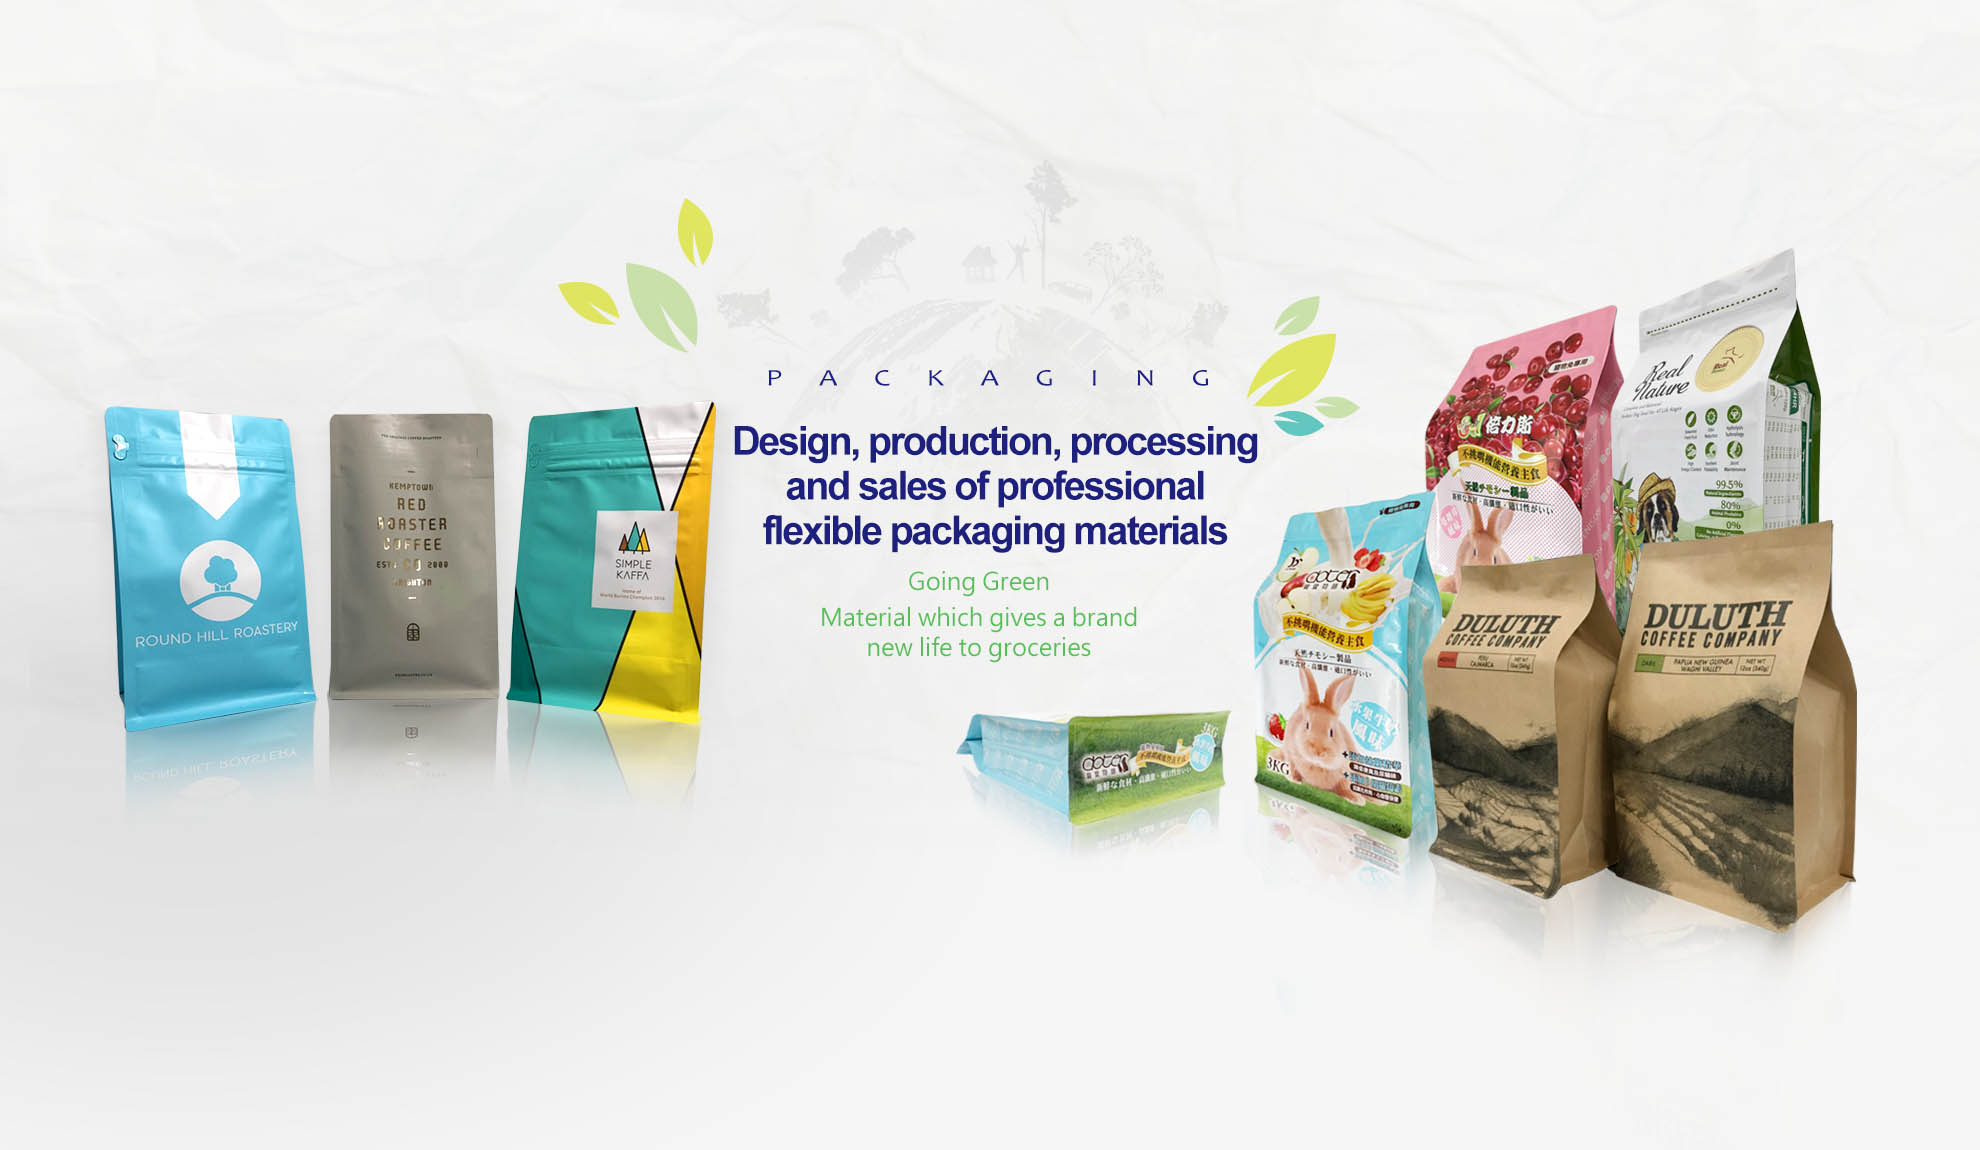 Design, production, processing and sales of professional flexible packaging material